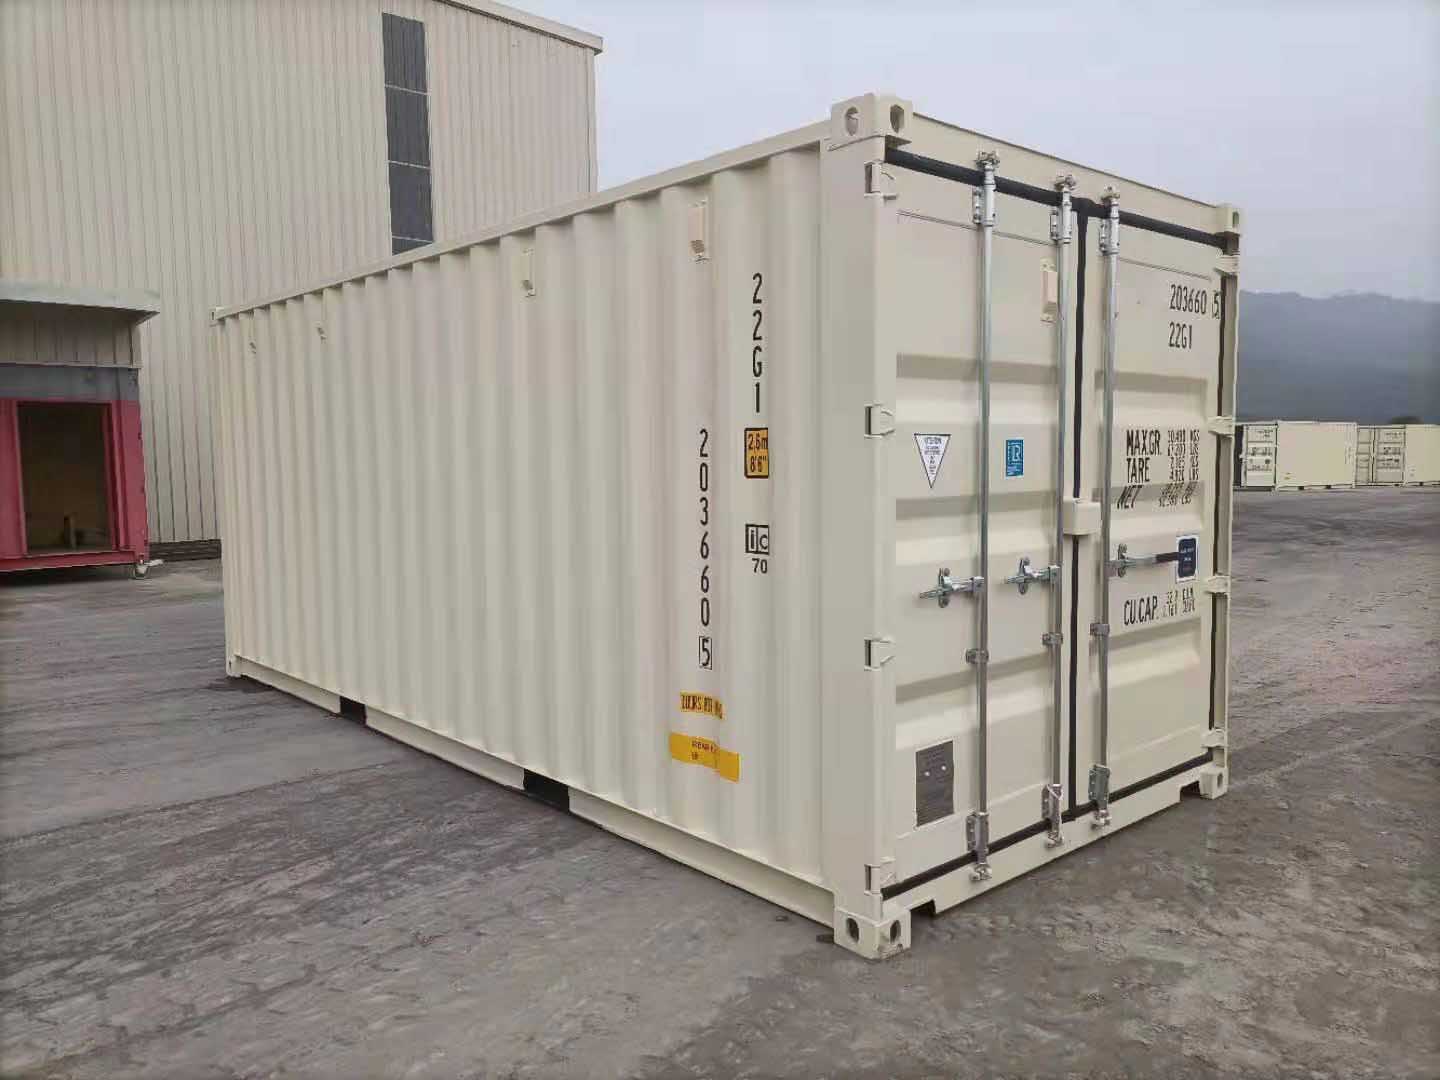 Shipping containers for sale in Logan